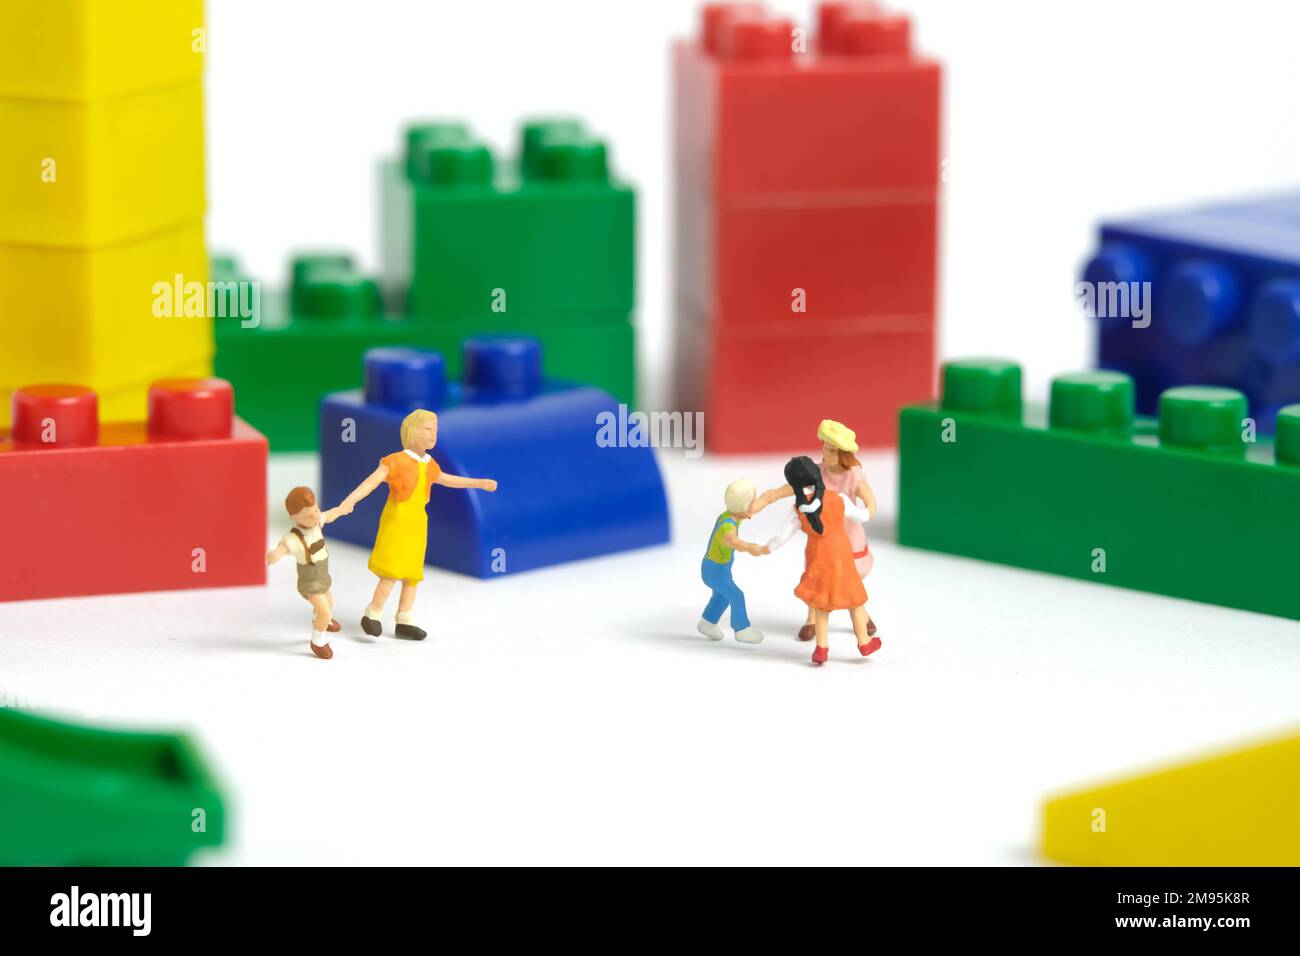 Miniature people toy figure photography. Fun learning concept. Kids playing building block together. Isolated on white background. Image photo Stock Photo